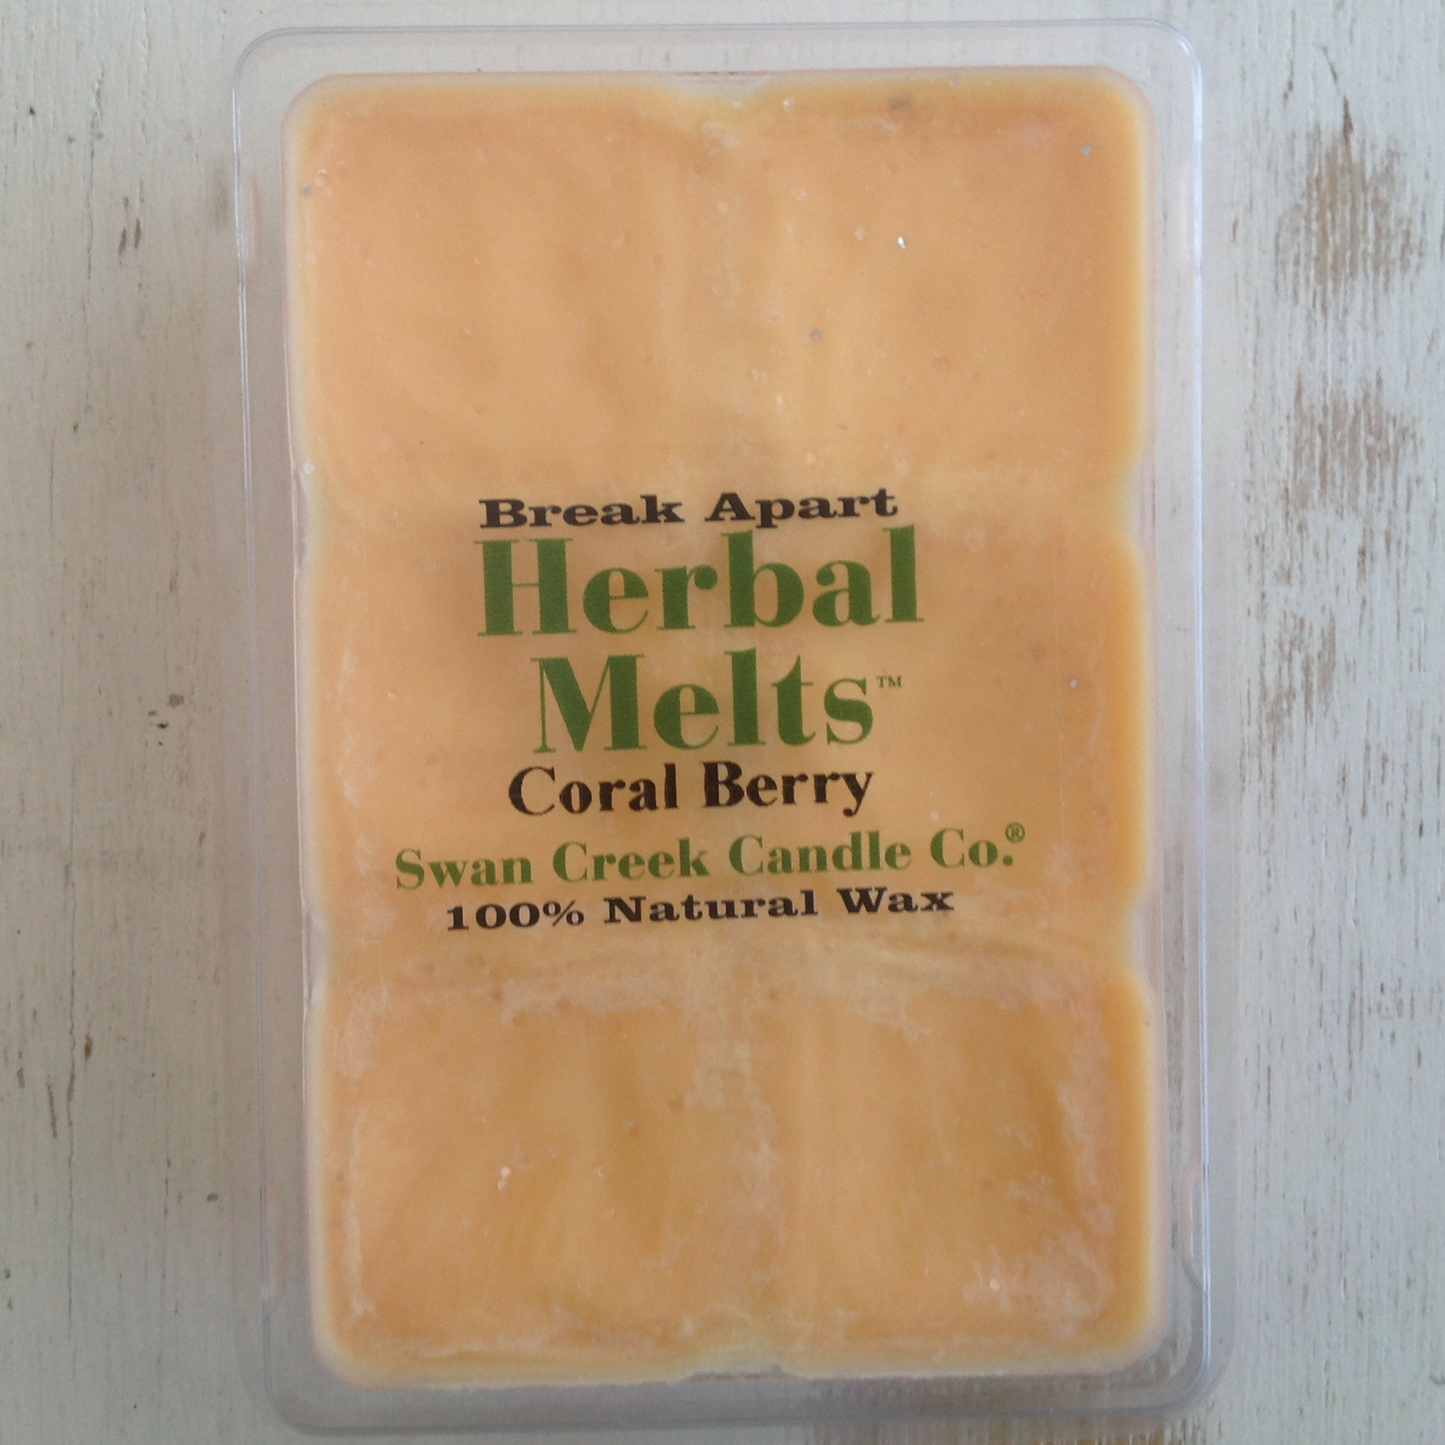 Swan Creek Candle Company Herbal Drizzle Wax Melts Coral Berry